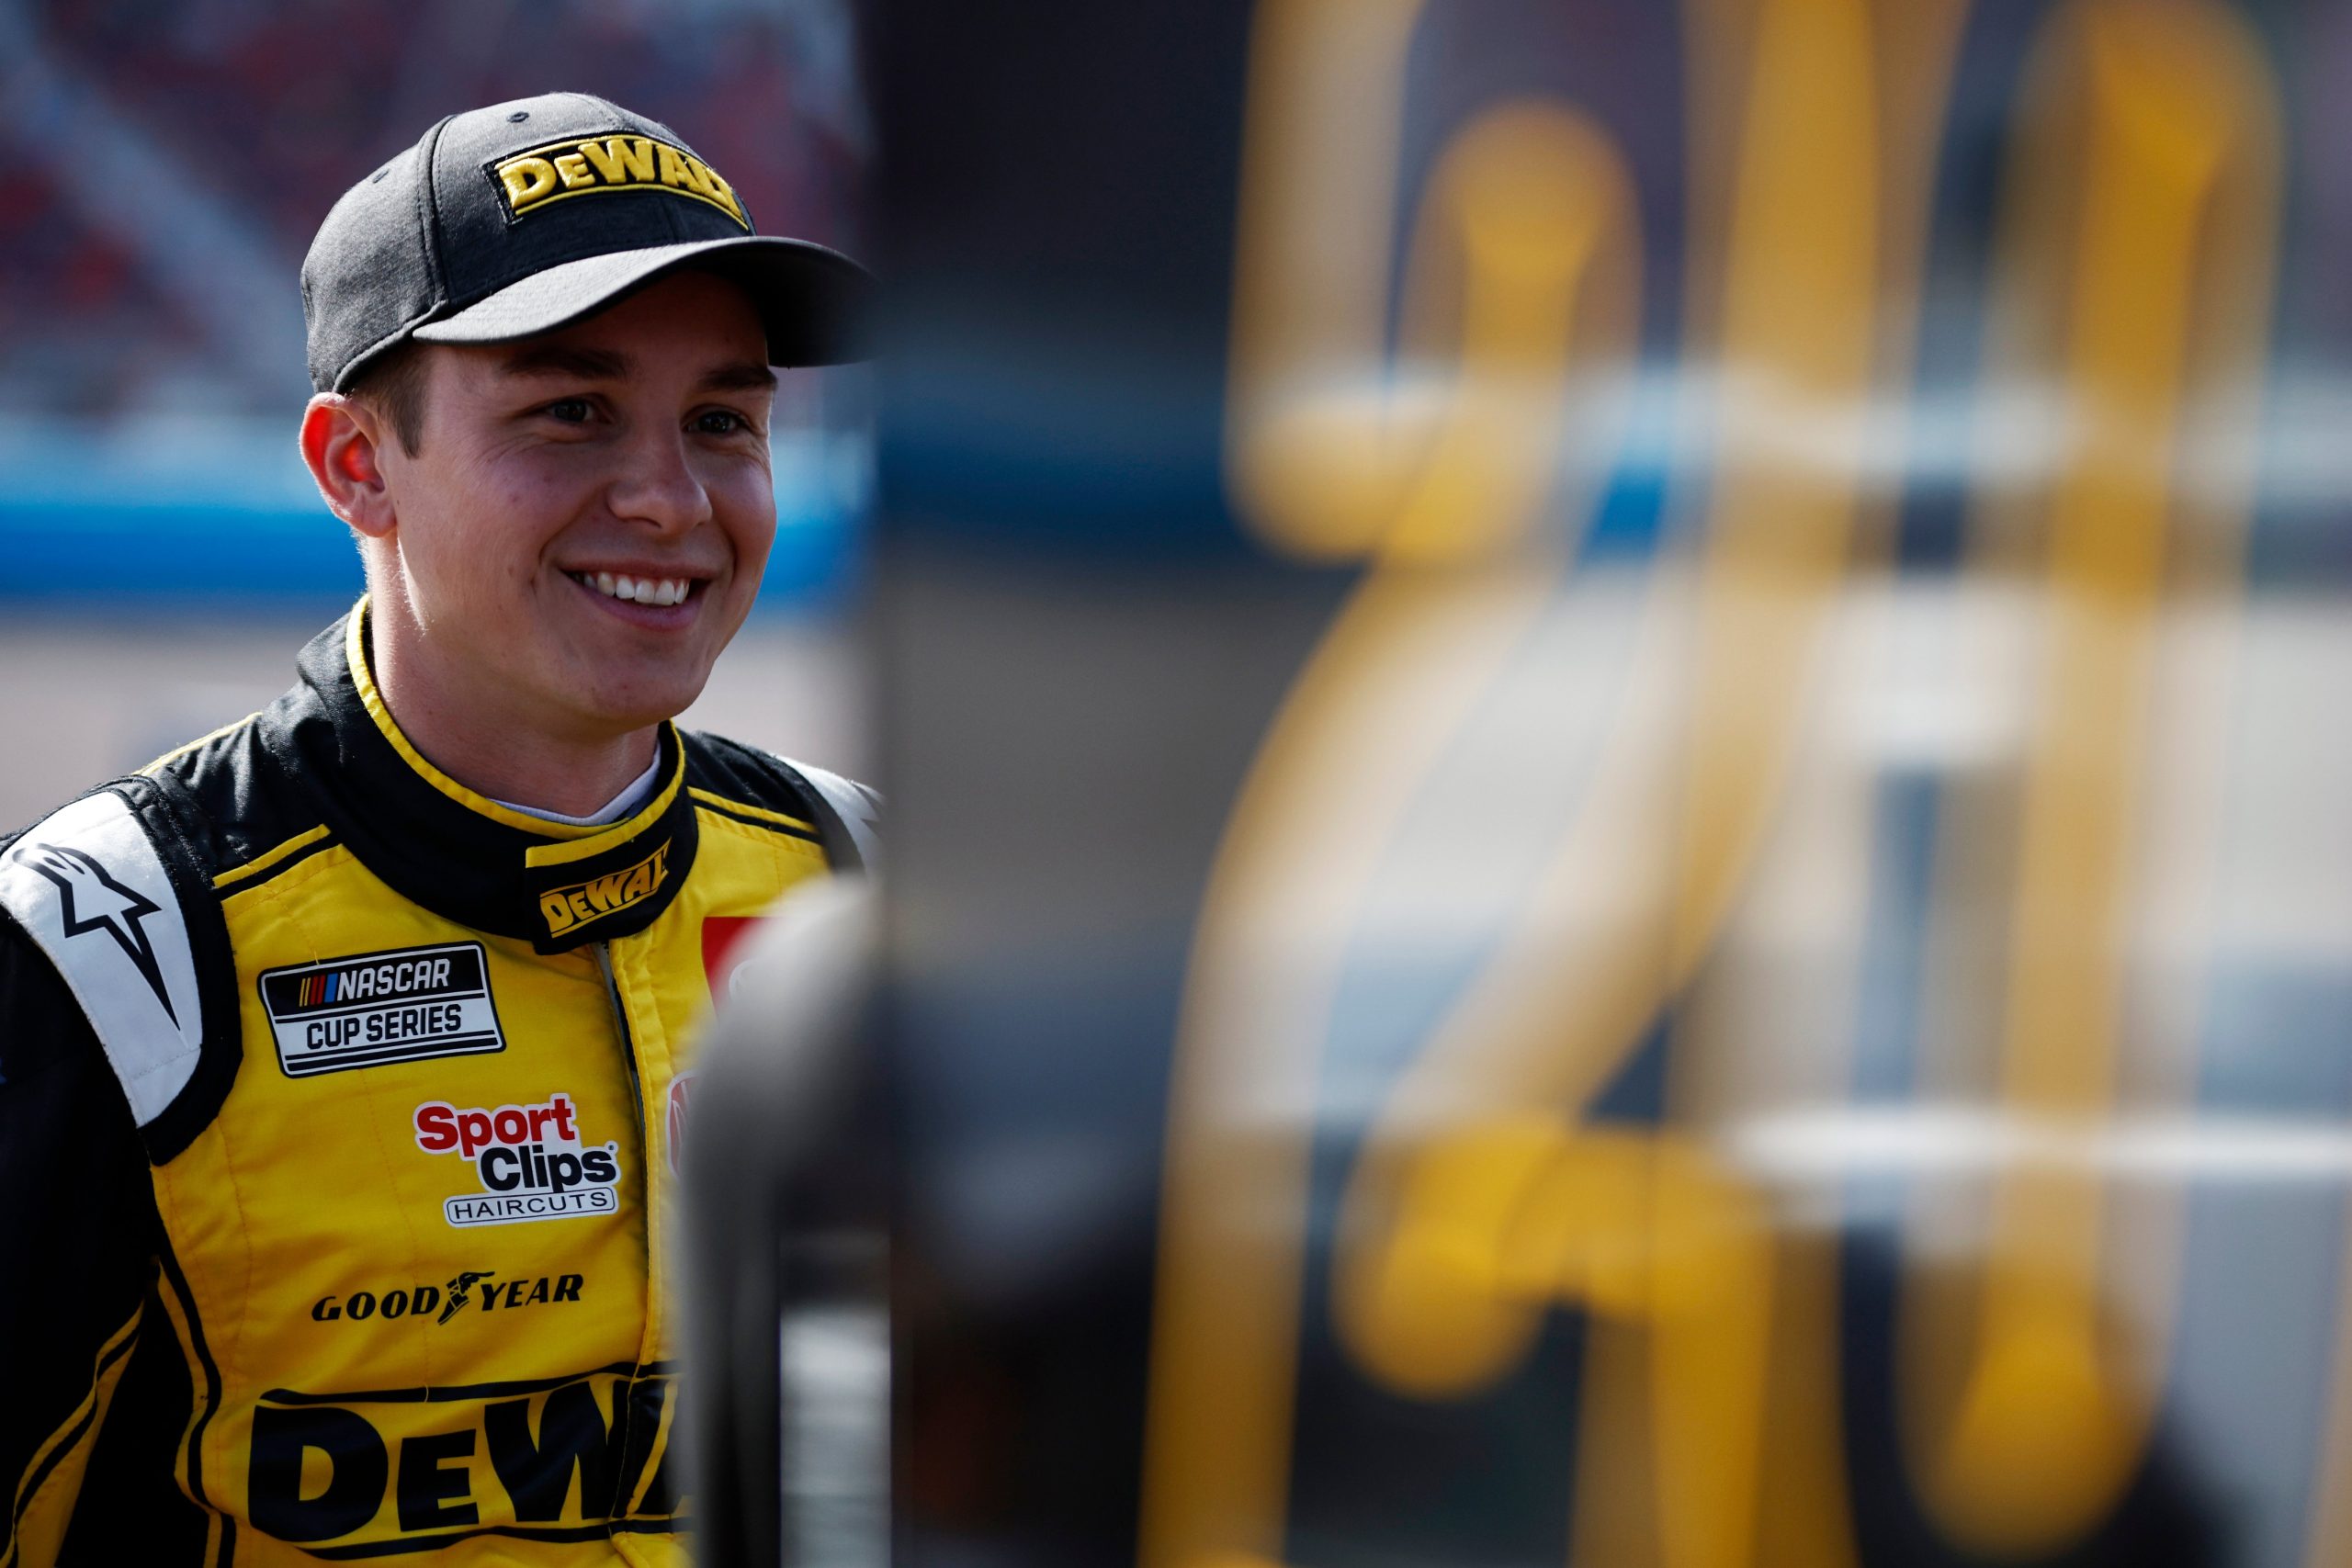 AVONDALE, ARIZONA - NOVEMBER 05: Christopher Bell, driver of the #20 DeWalt Toyota, waits on the grid during qualifying for the NASCAR Cup Series Championship at Phoenix Raceway on November 05, 2022 in Avondale, Arizona. (Photo by Sean Gardner/Getty Images)